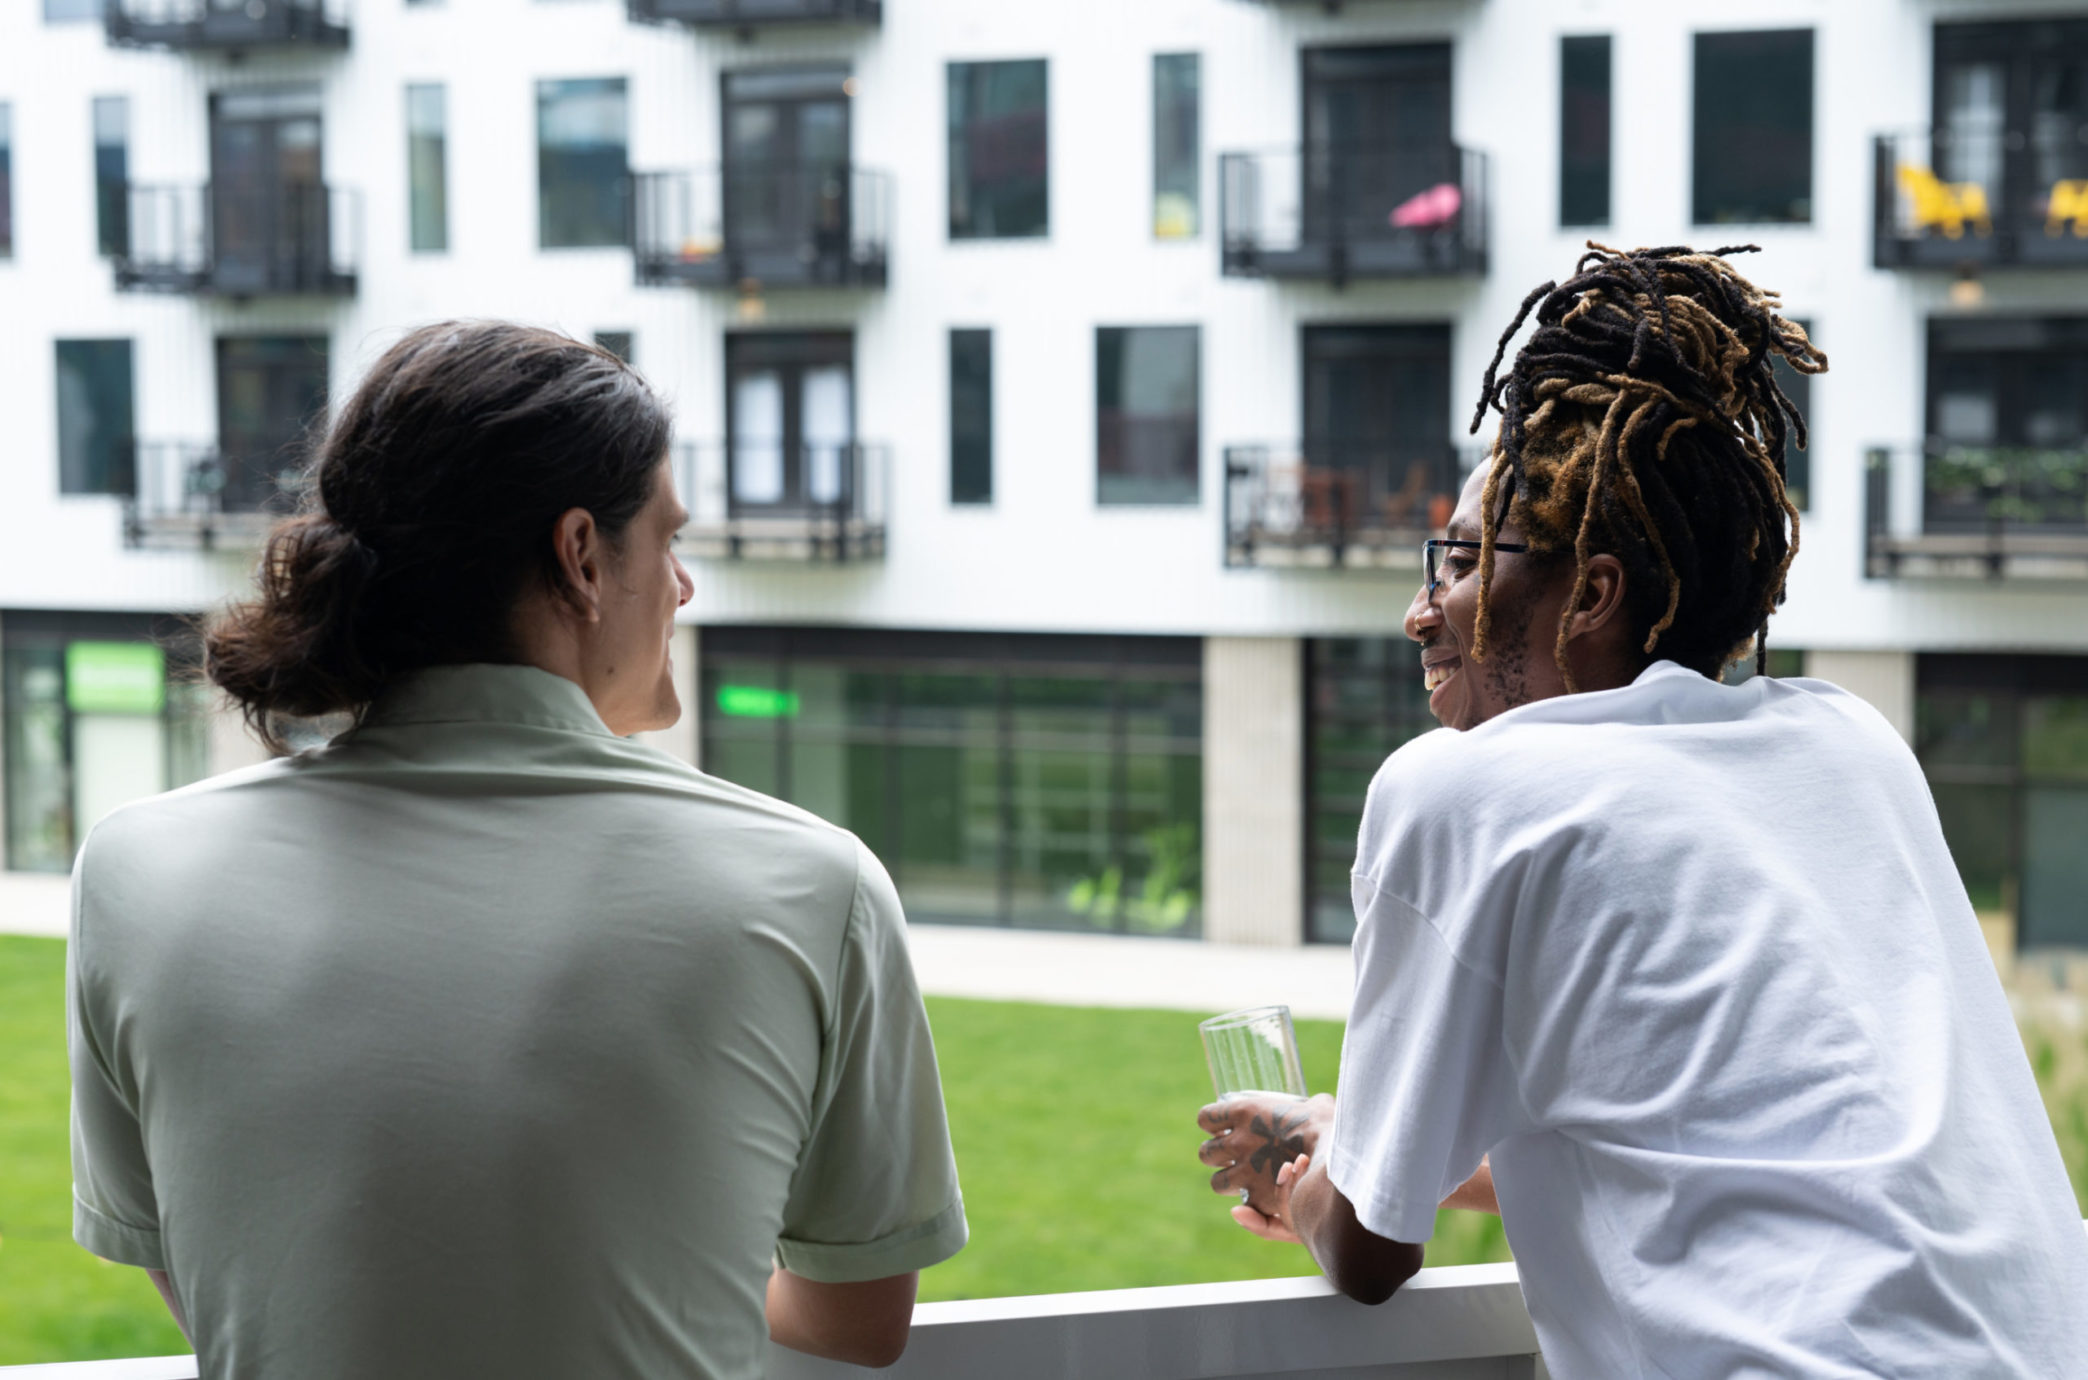 Two people leaning on the railing, engaged in conversation at a Gravity community space. A place for discovery, questioning, creation, and transformation.